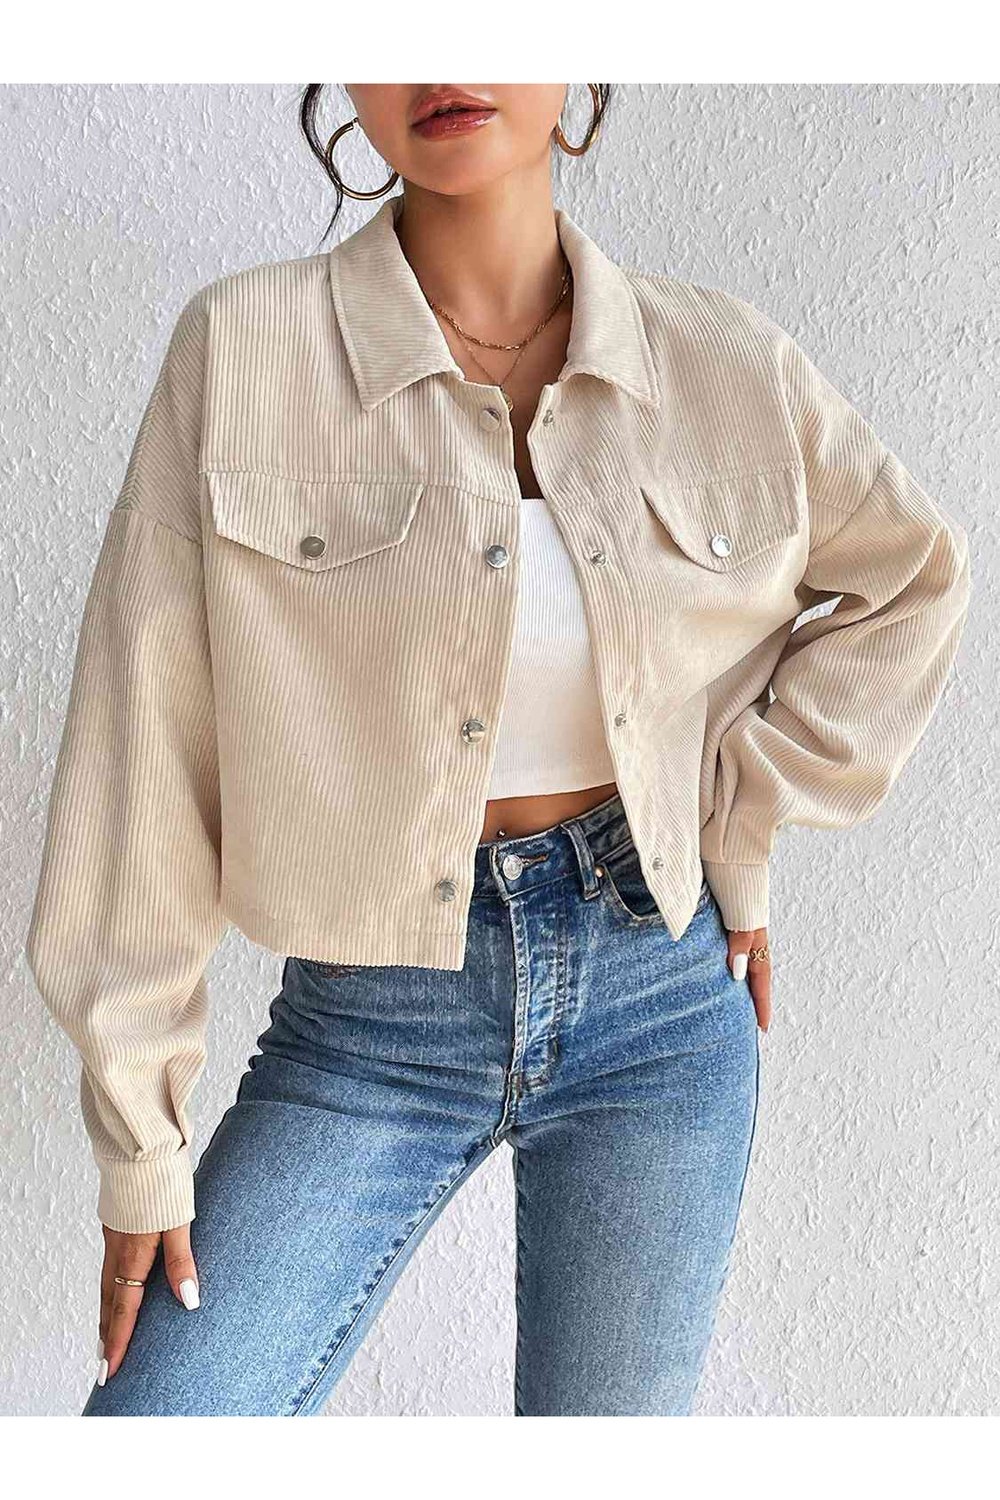 Snap Down Collared Jacket - Jackets - FITGGINS